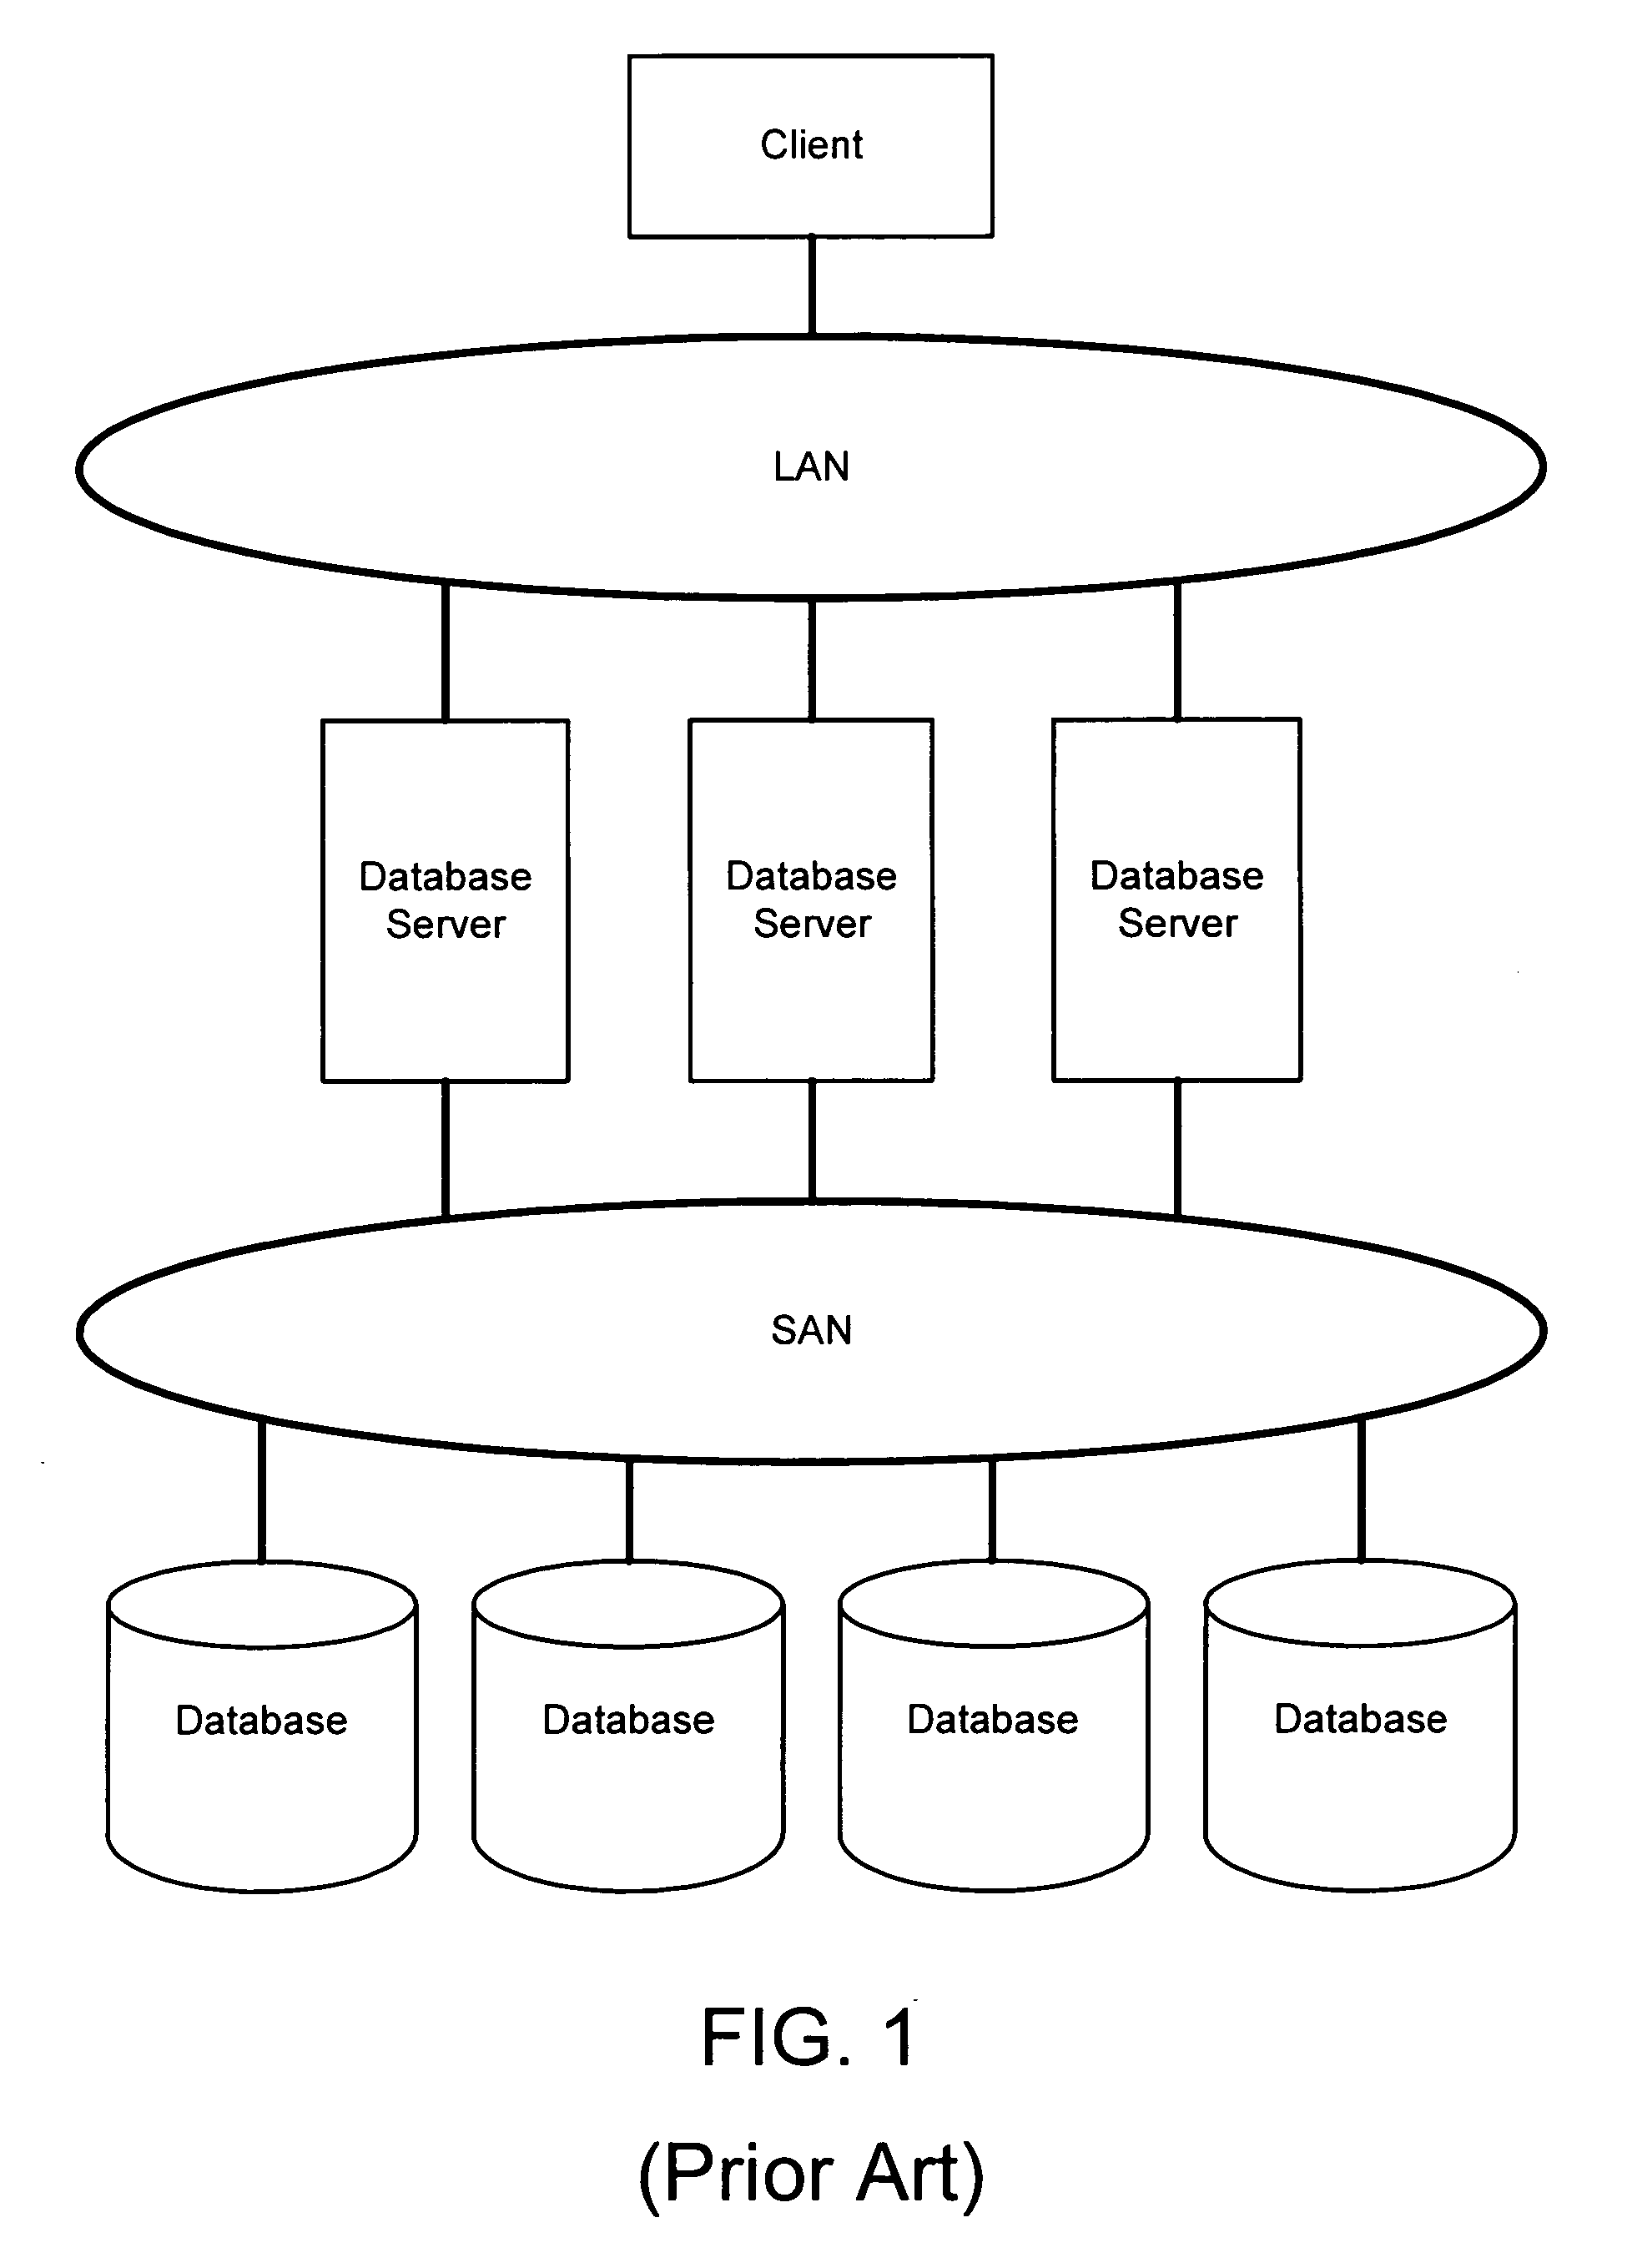 Apparatus, system, and method for database provisioning